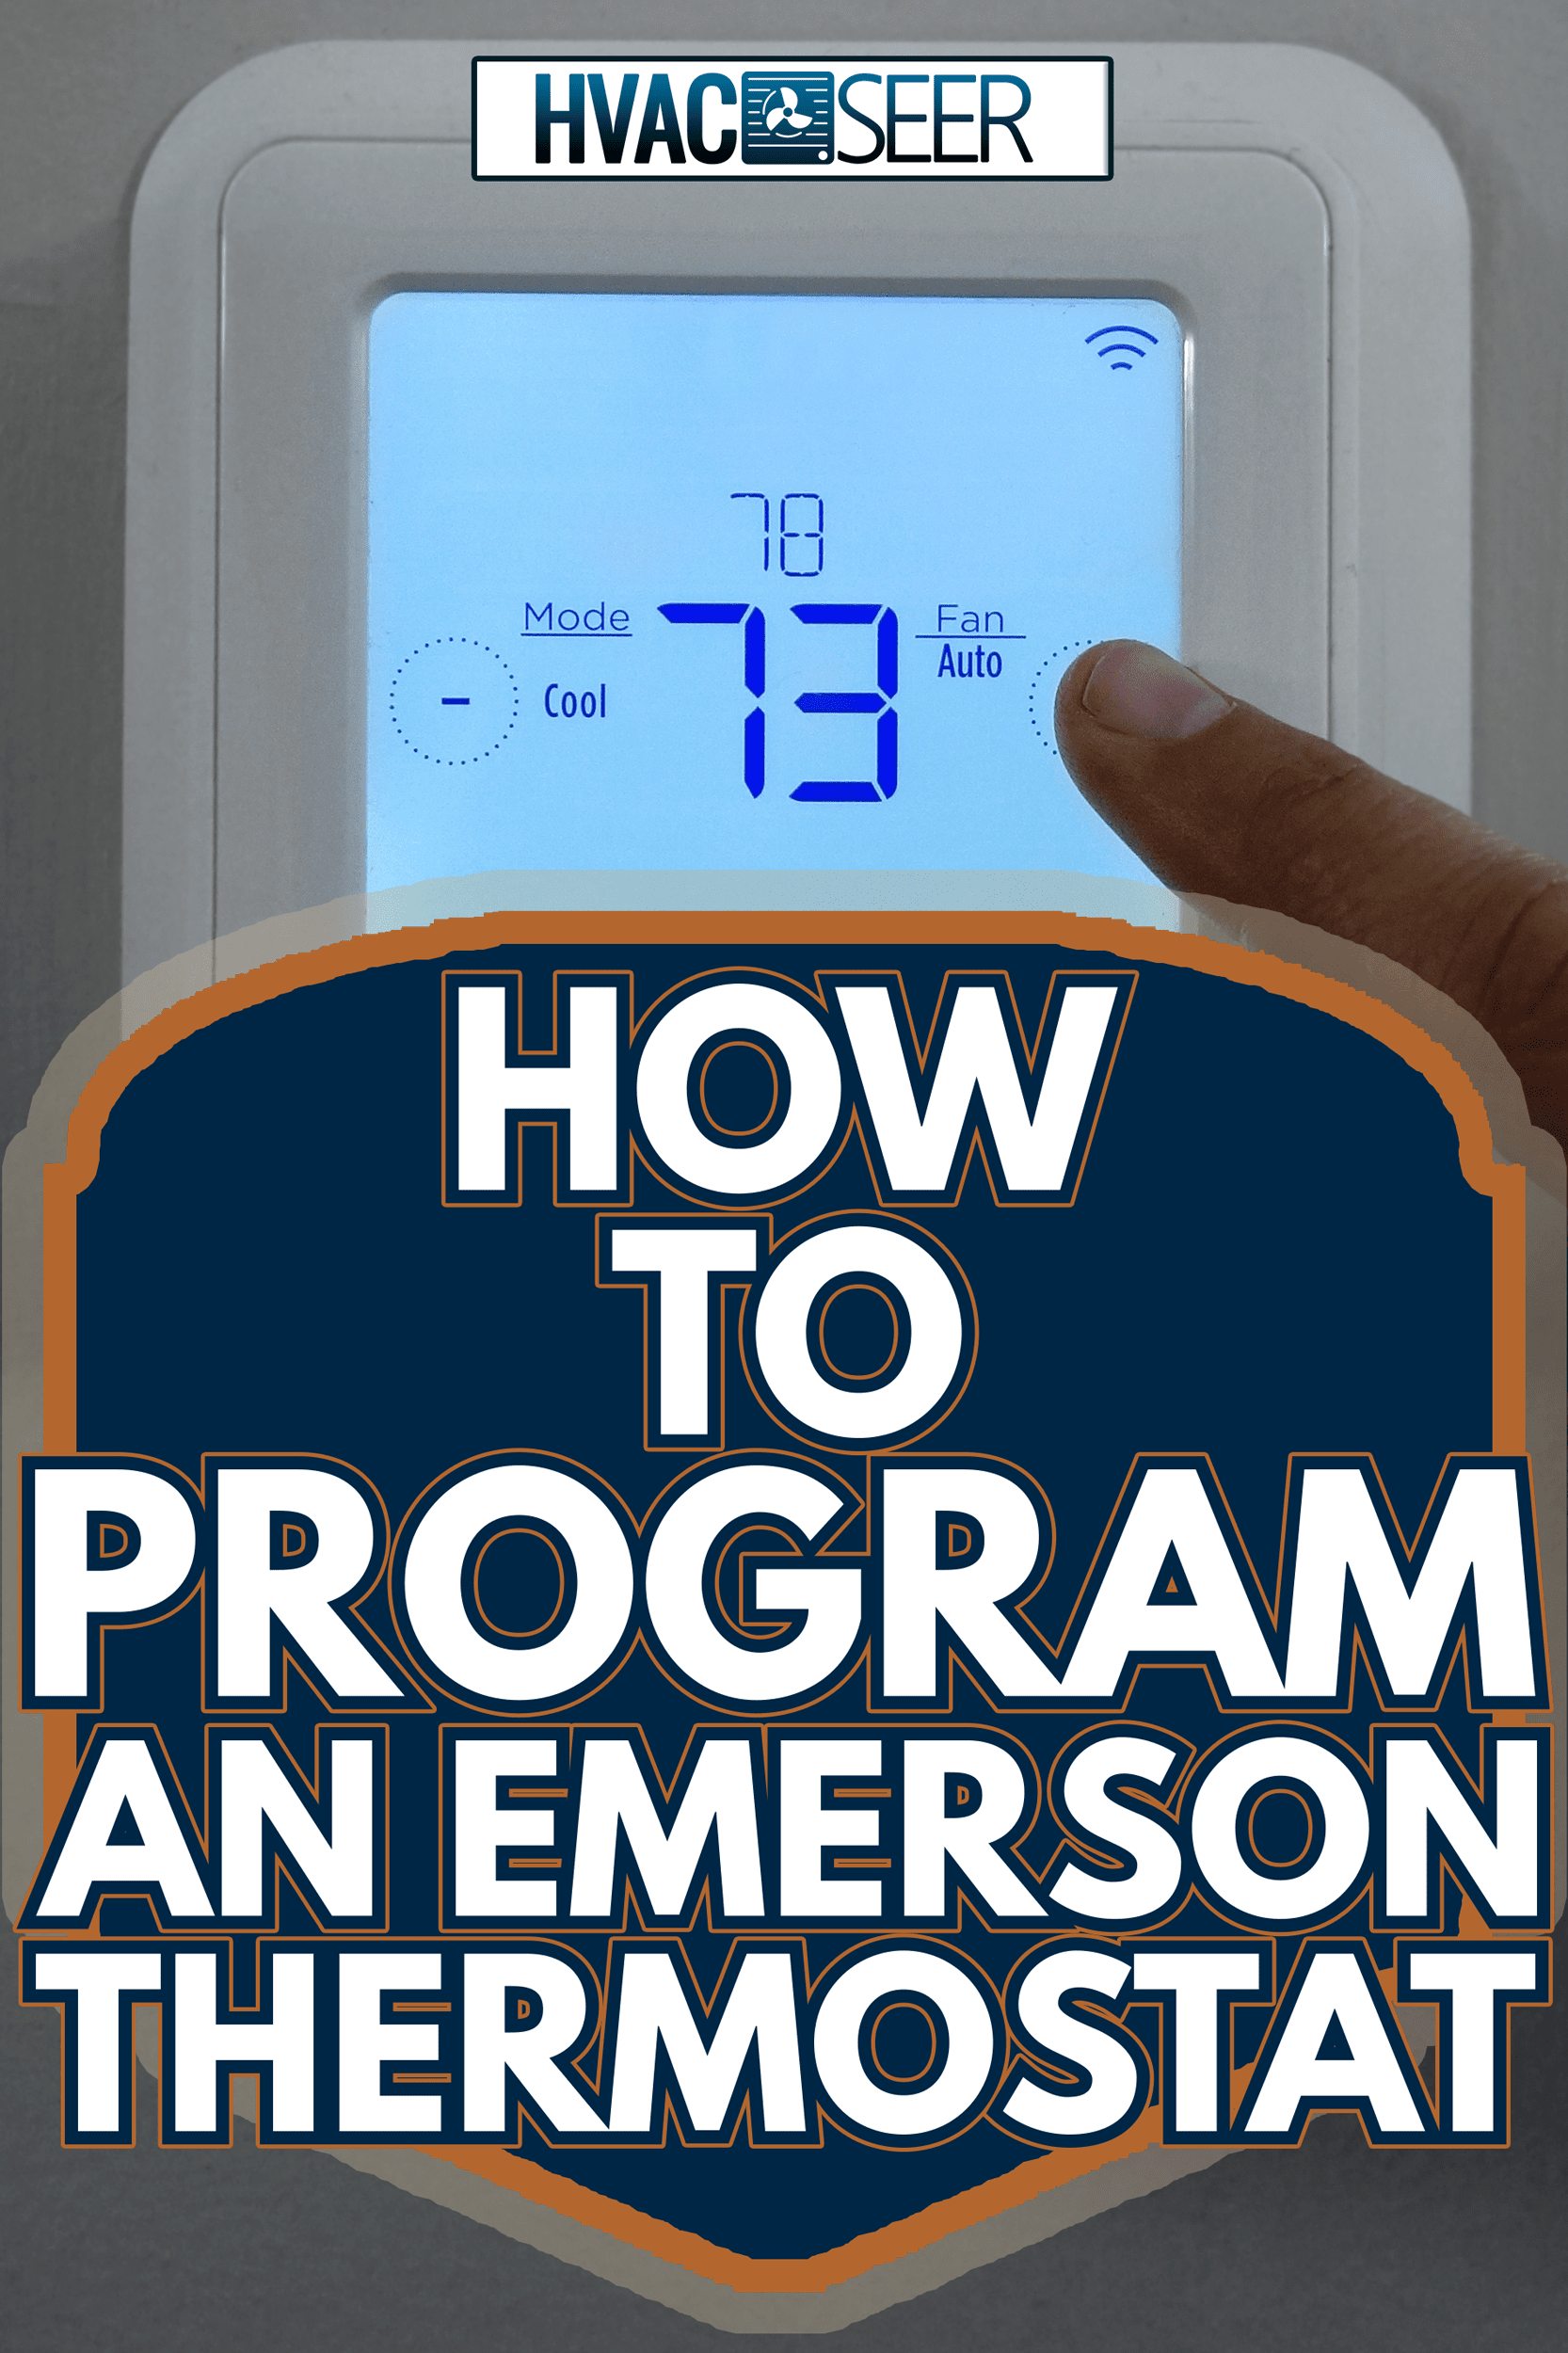 Person adjusting the home temperature on a smart thermostat - How To Program An Emerson Thermostat